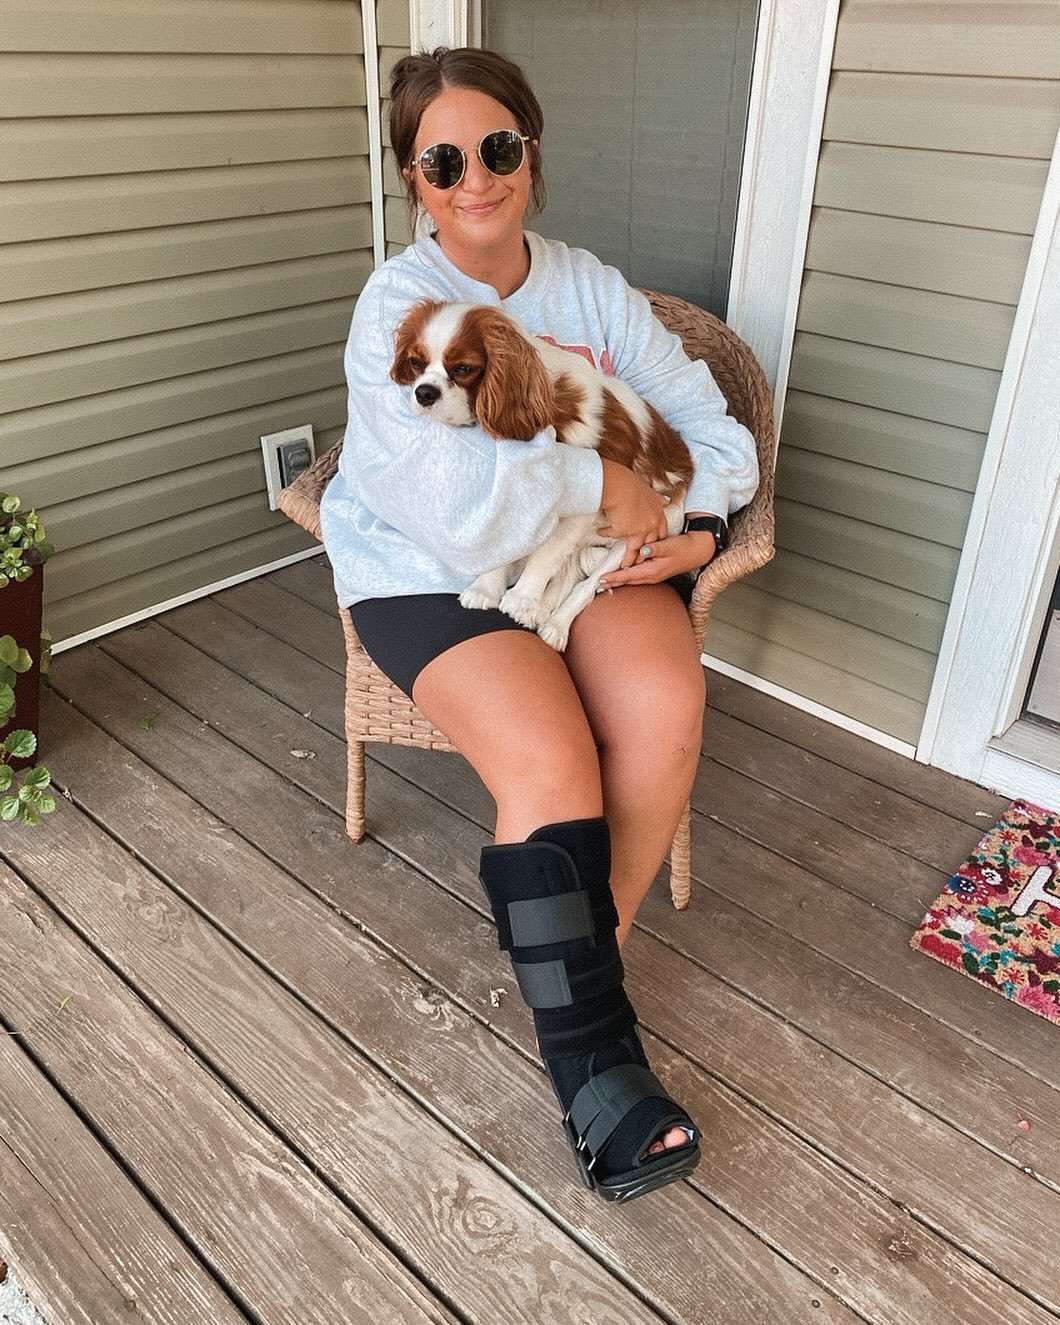 It&rsquo;s crazy how quickly things can change &mdash; one minute I was happily leaving school &amp; the next I was face down in the parking lot! Unfortunately, I fell off the curb &amp; fractured my foot. Prayers for quick healing are much appreciat